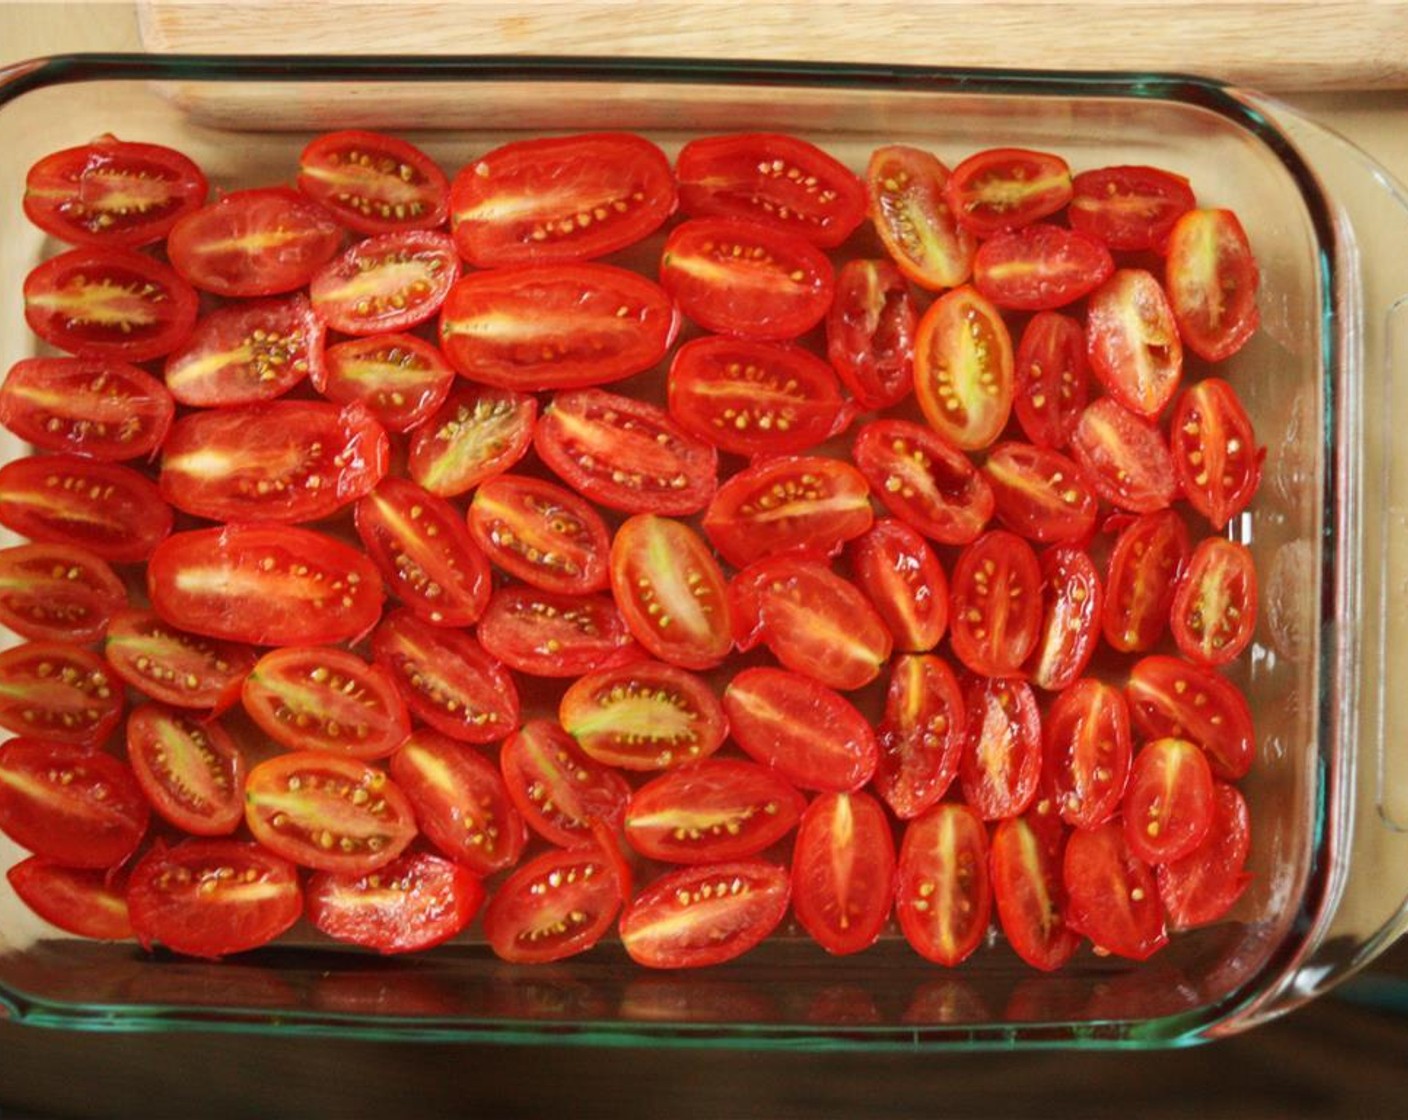 step 3 Wash Cherry Tomatoes (3 cups) and pat dry. Slice each tomato in half and place them in the baking dish, skin-side down, to form a single layer in the baking dish. Fit in as many tomatoes as you can.